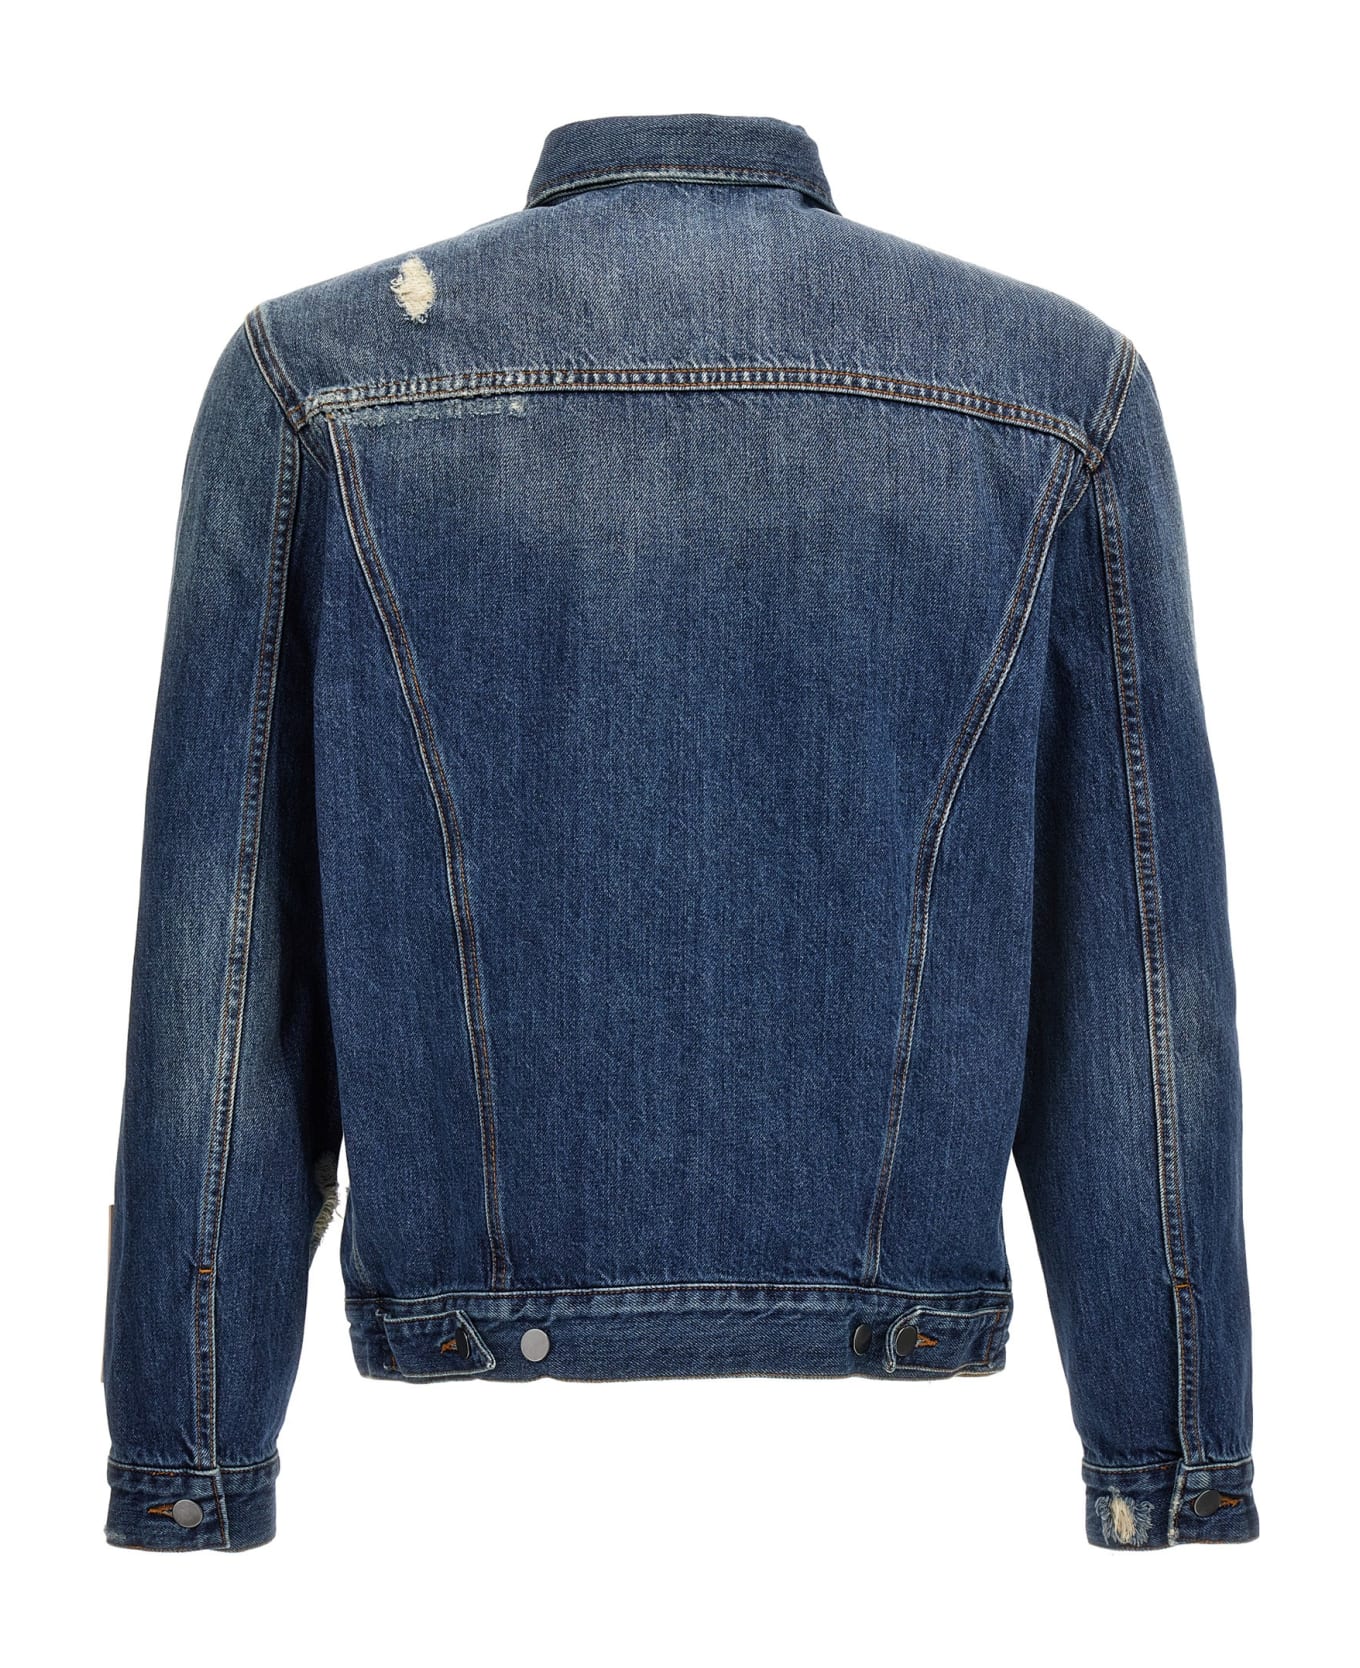 A-COLD-WALL 'foundry Selvedge' Jacket - Blue